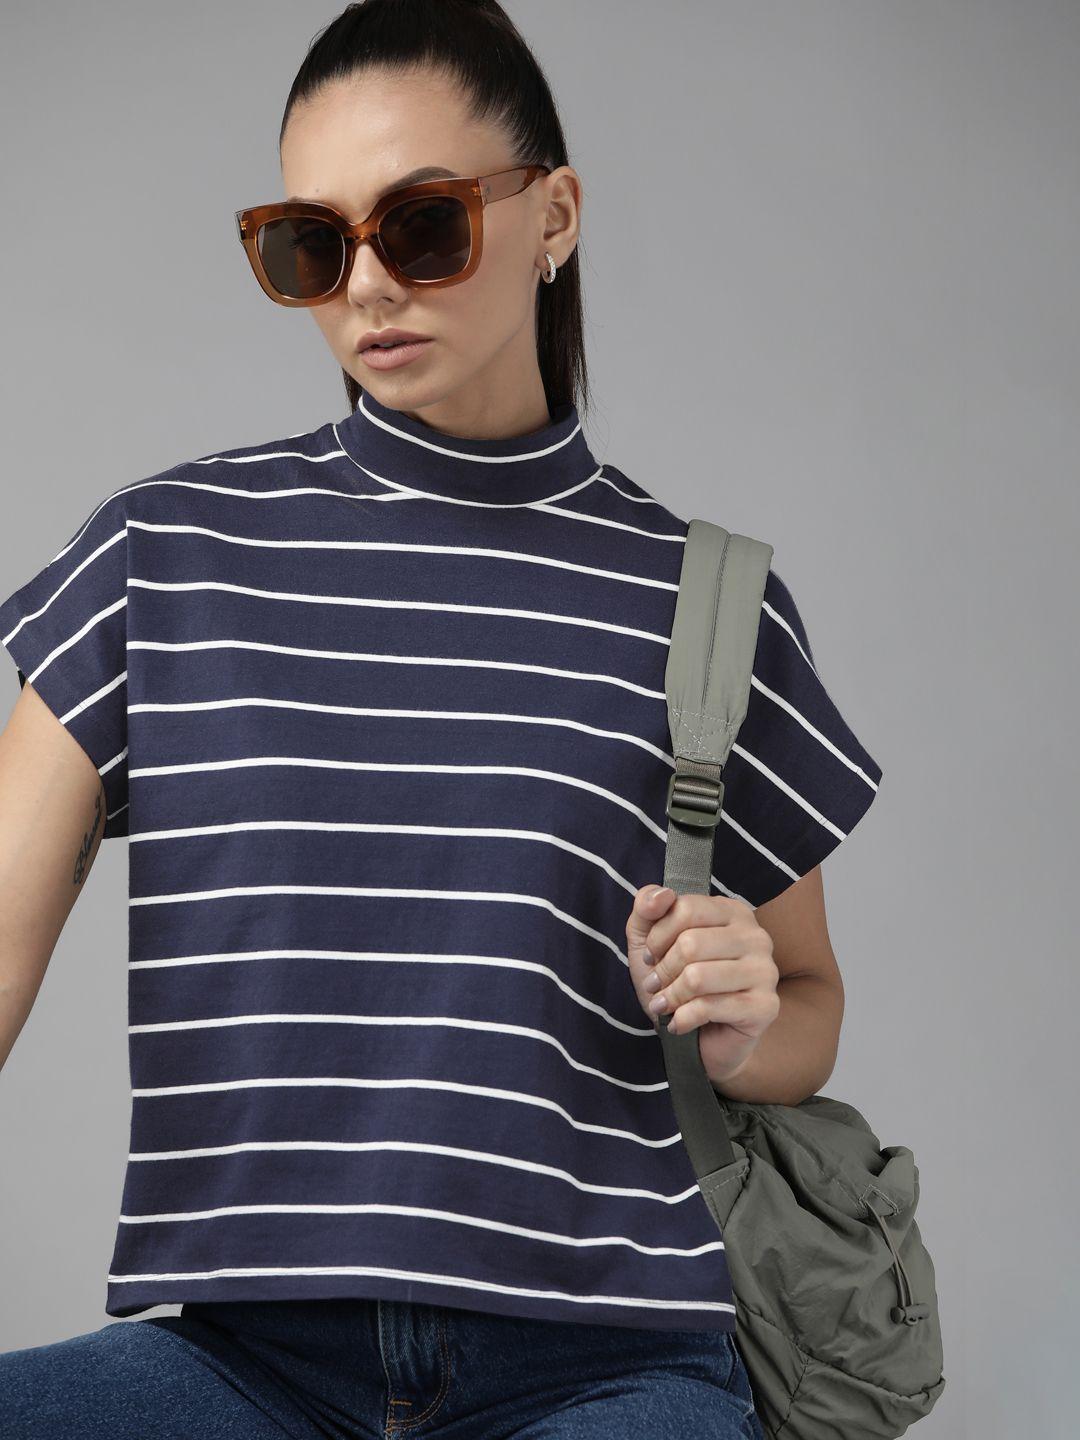 roadster-navy-blue-&-white-striped-top